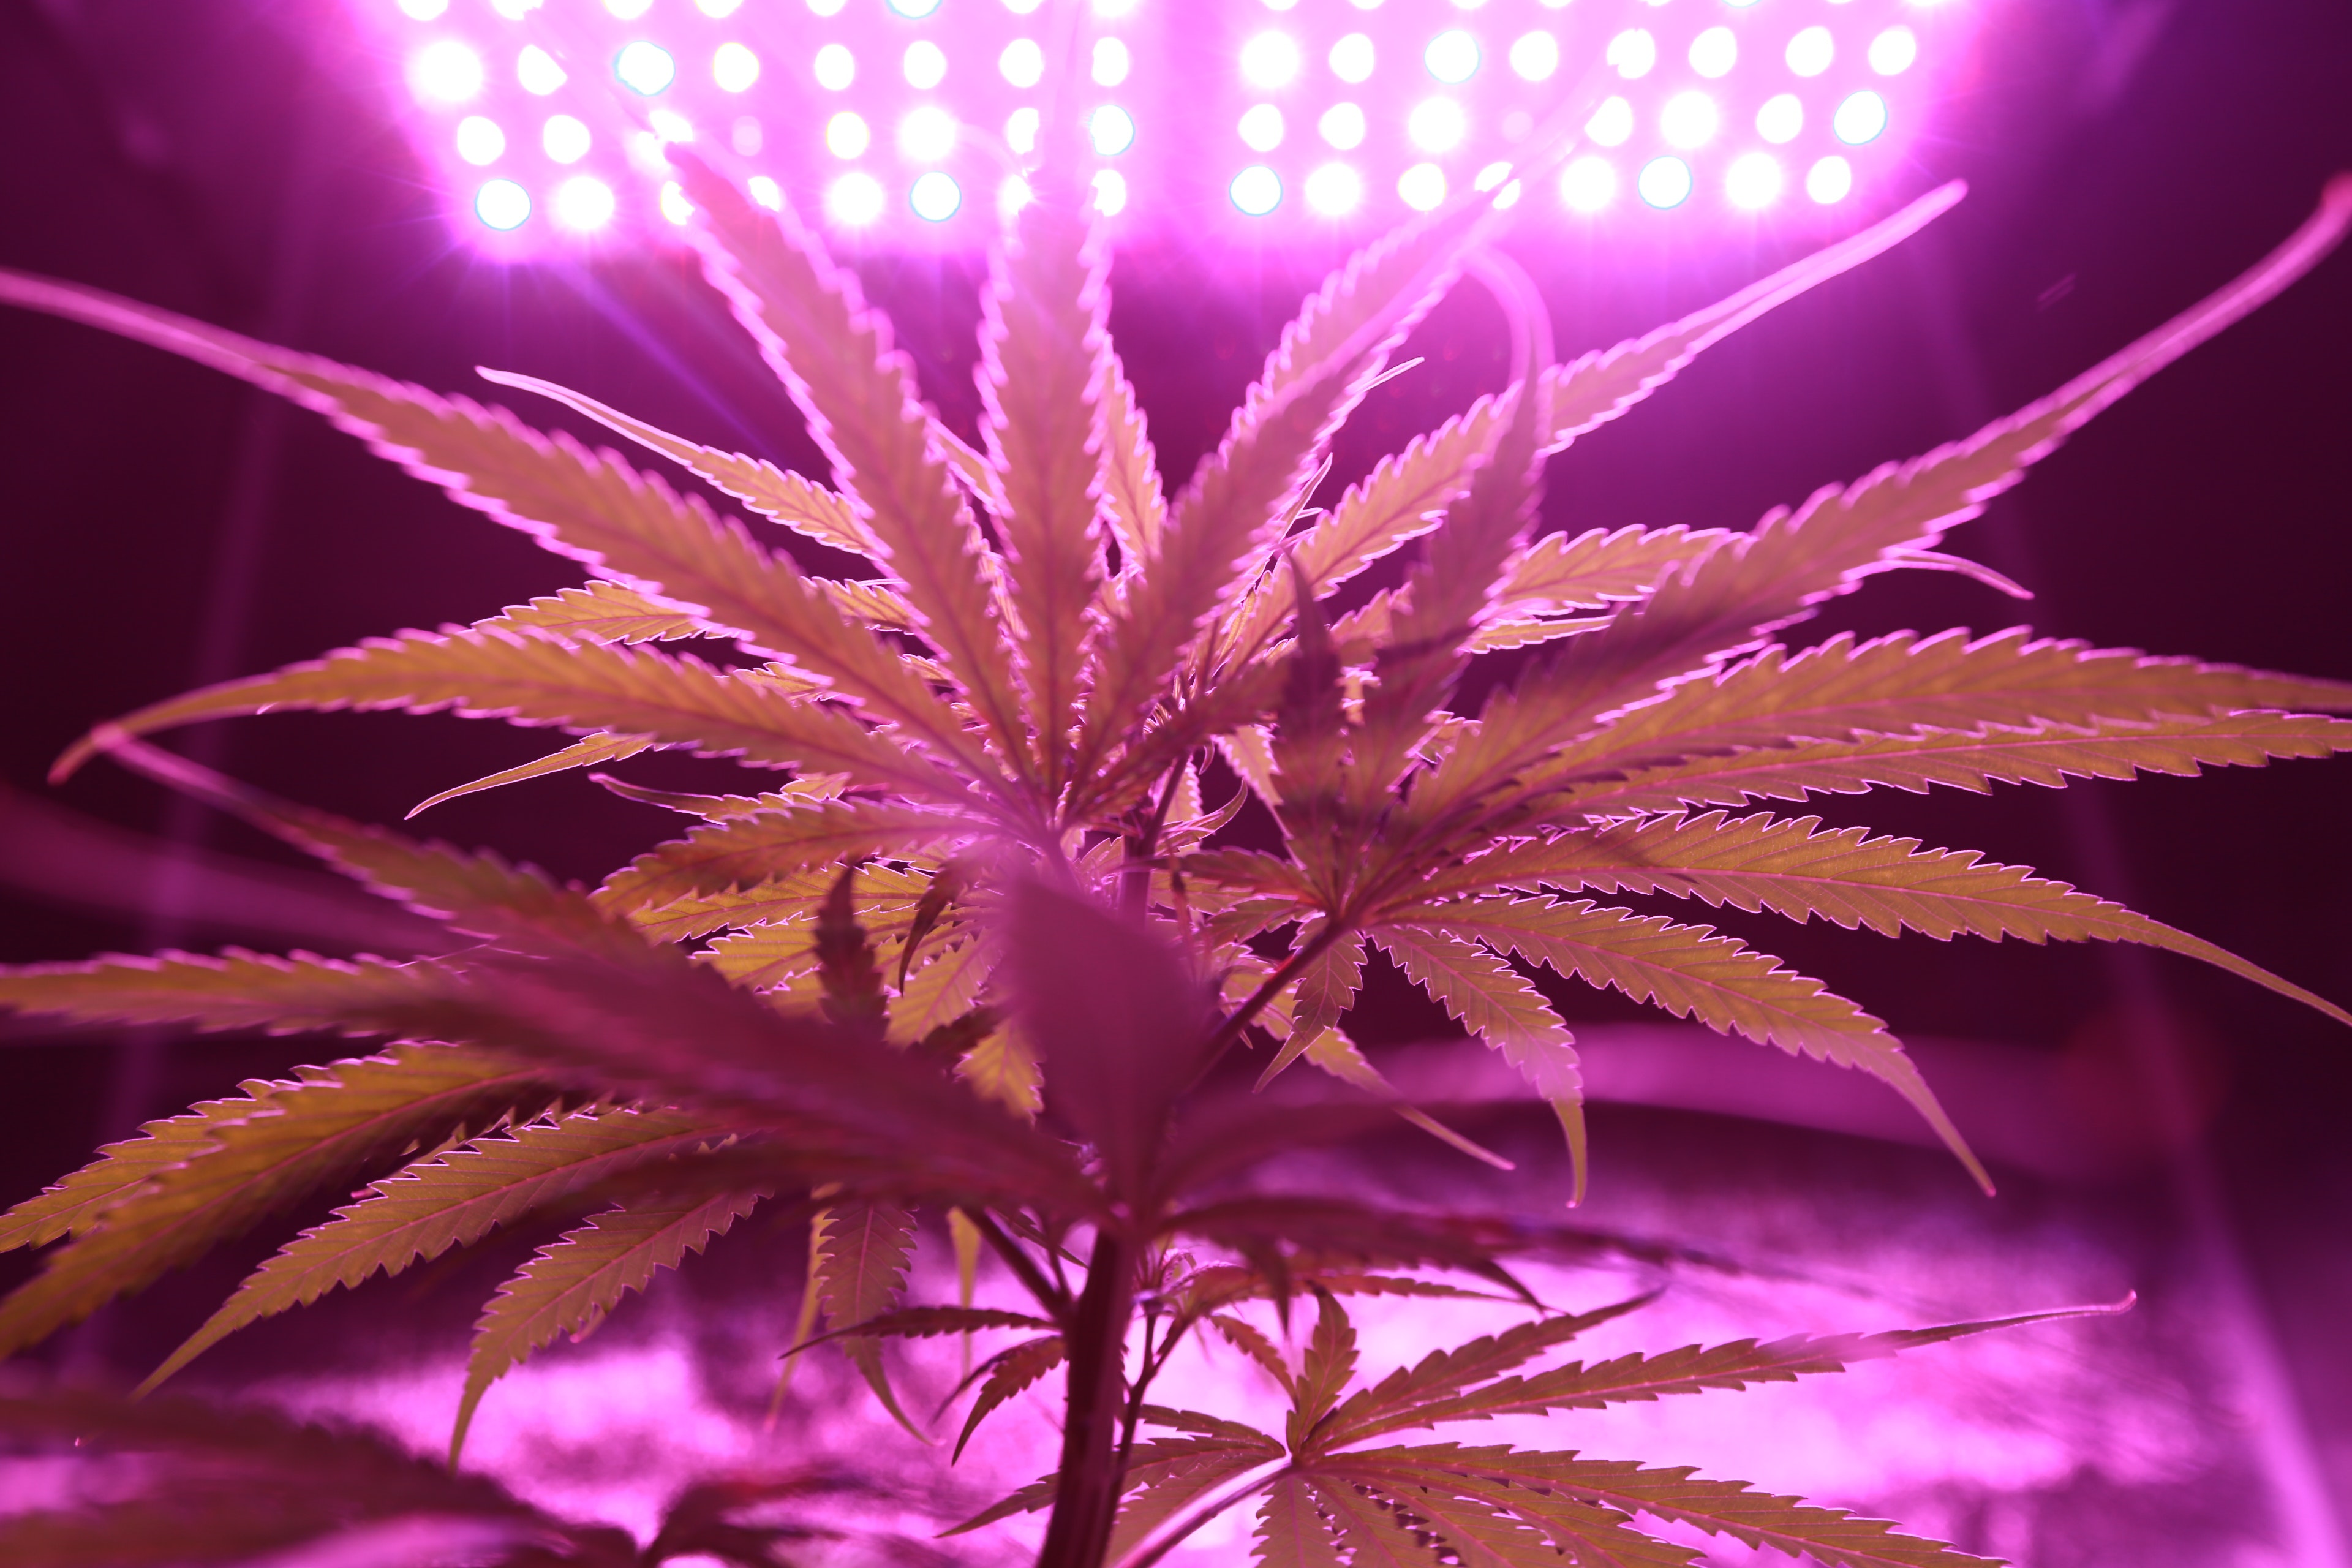 A bunch of green cannabis leaves with a purple light above it